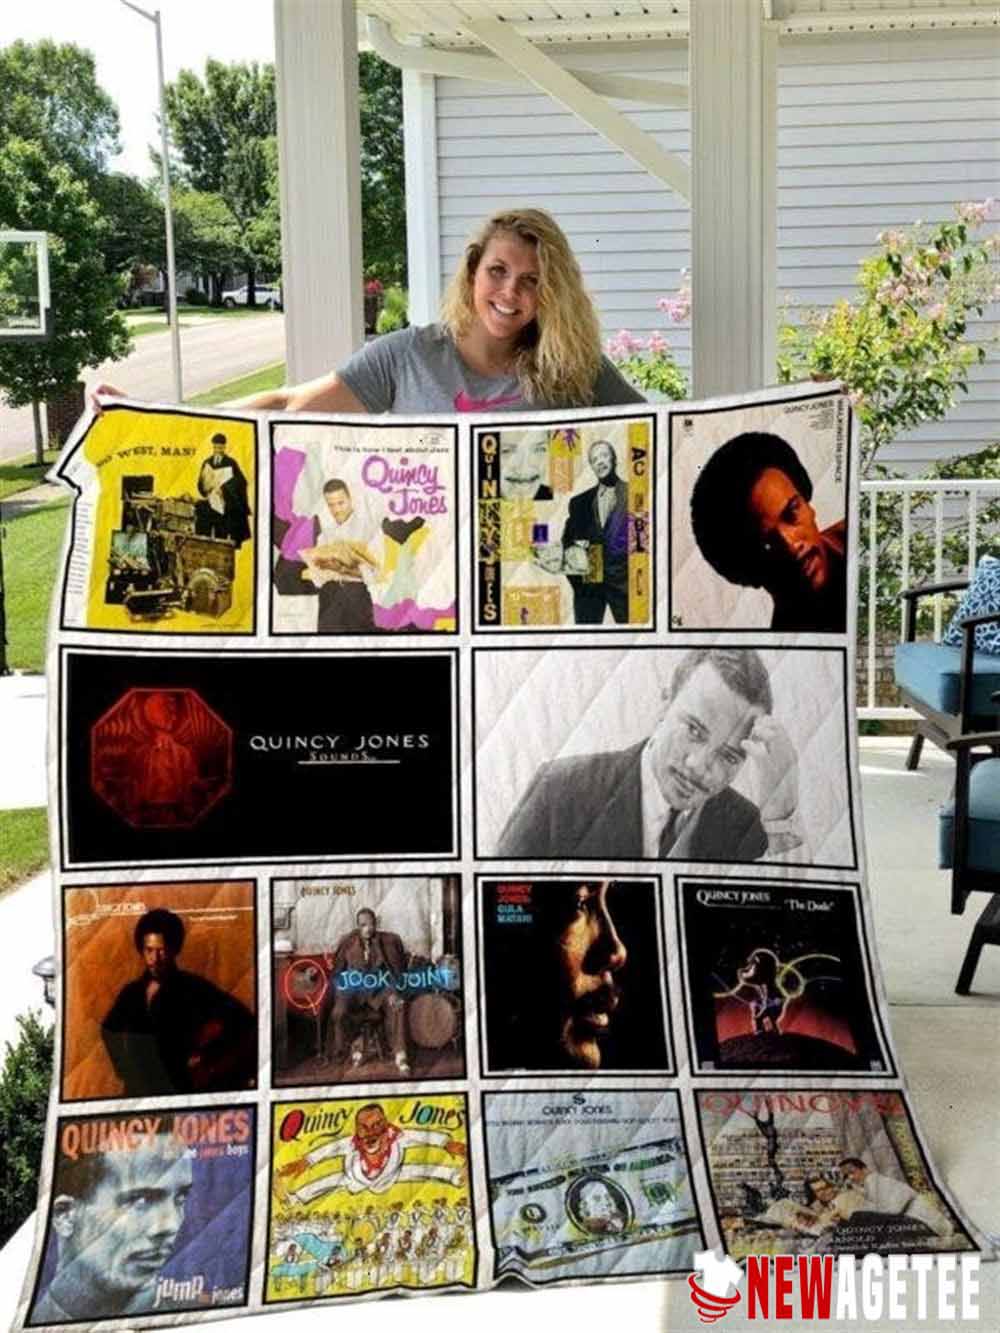 Quincy Jones Albums Soft Fleece Blanket Gifts For R B And Soul Music Fans